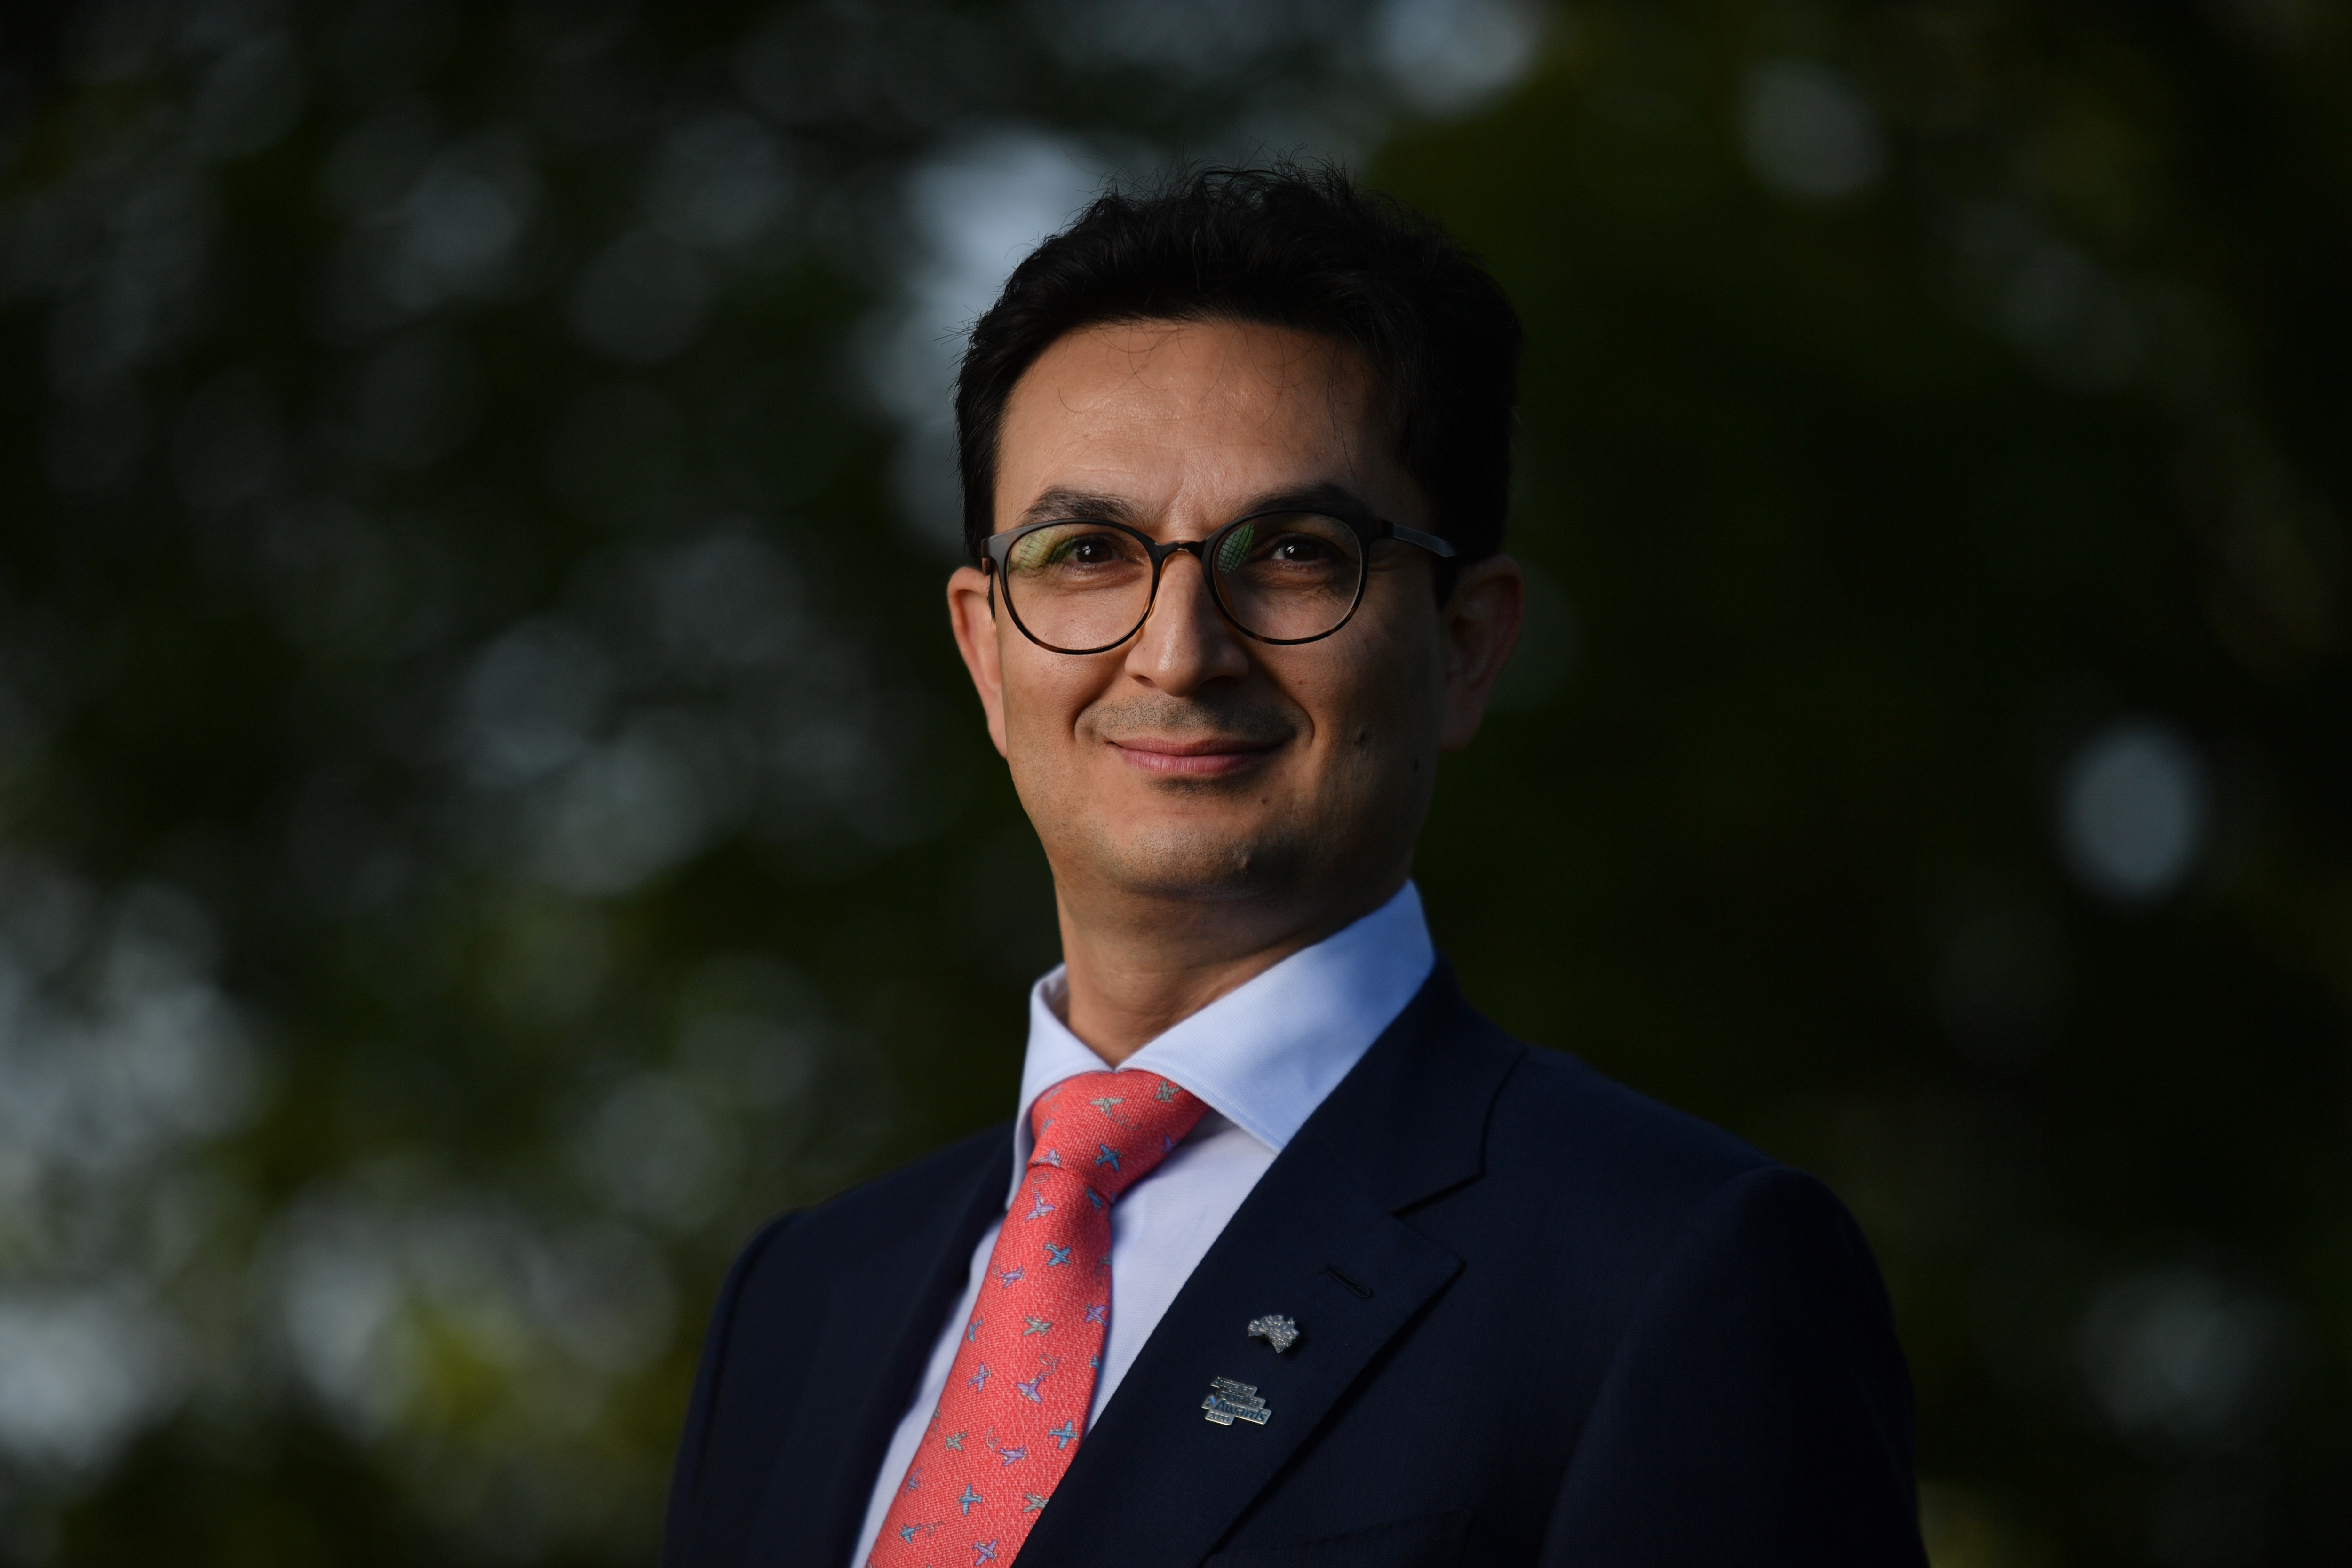 NSW's 2020 Australian of the Year finalist Professor Munjed Al Muderis poses for a portrait at a reception at Government House in Canberra, Friday, January 24, 2020. (AAP Image/Mick Tsikas) NO ARCHIVING